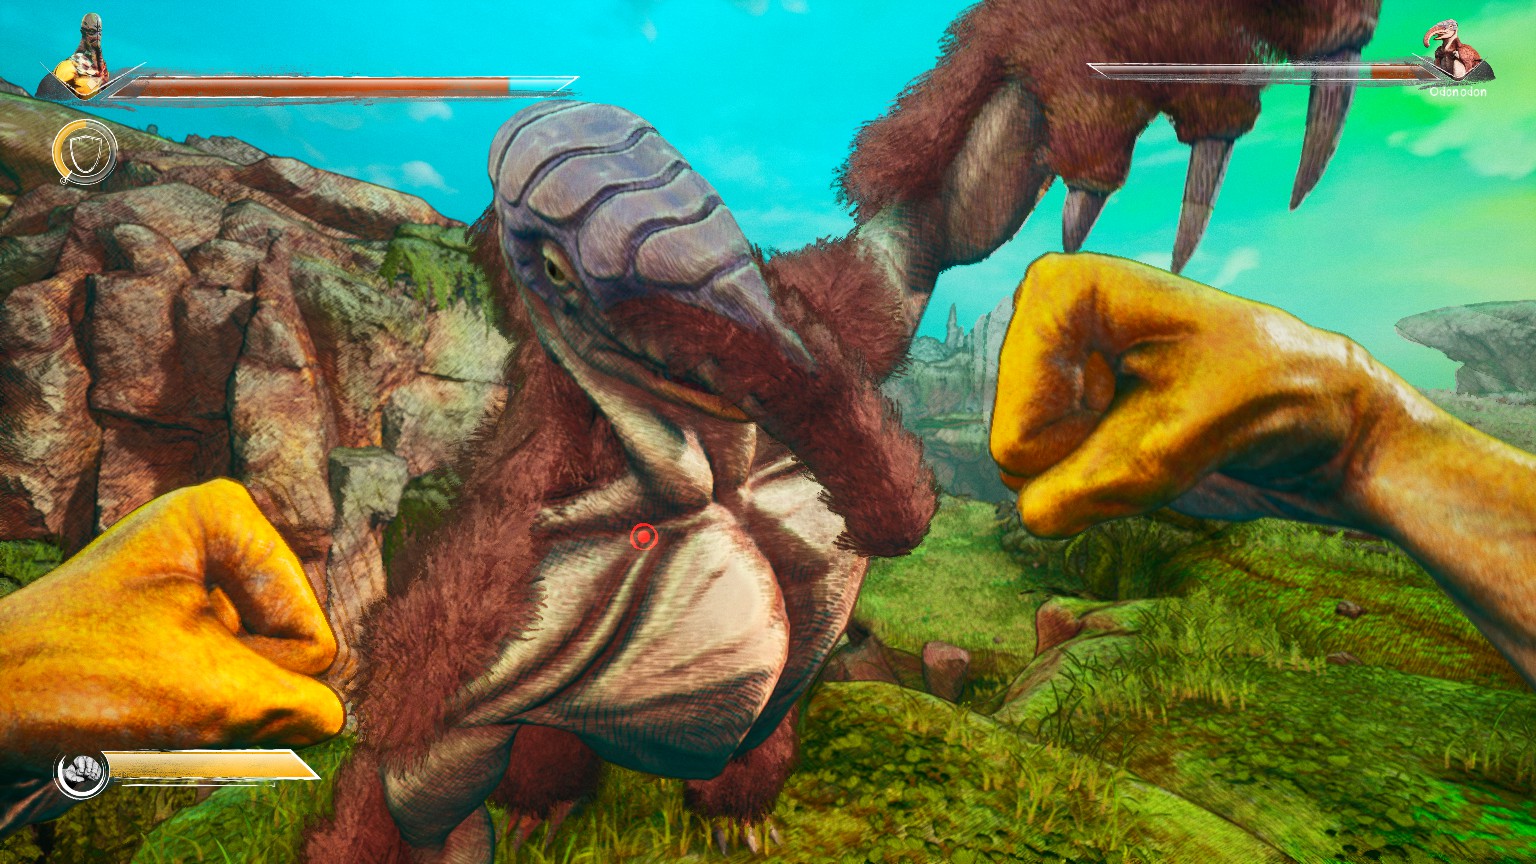 A first-person fight with a weird monster in Clash: Artifacts of Chaos.